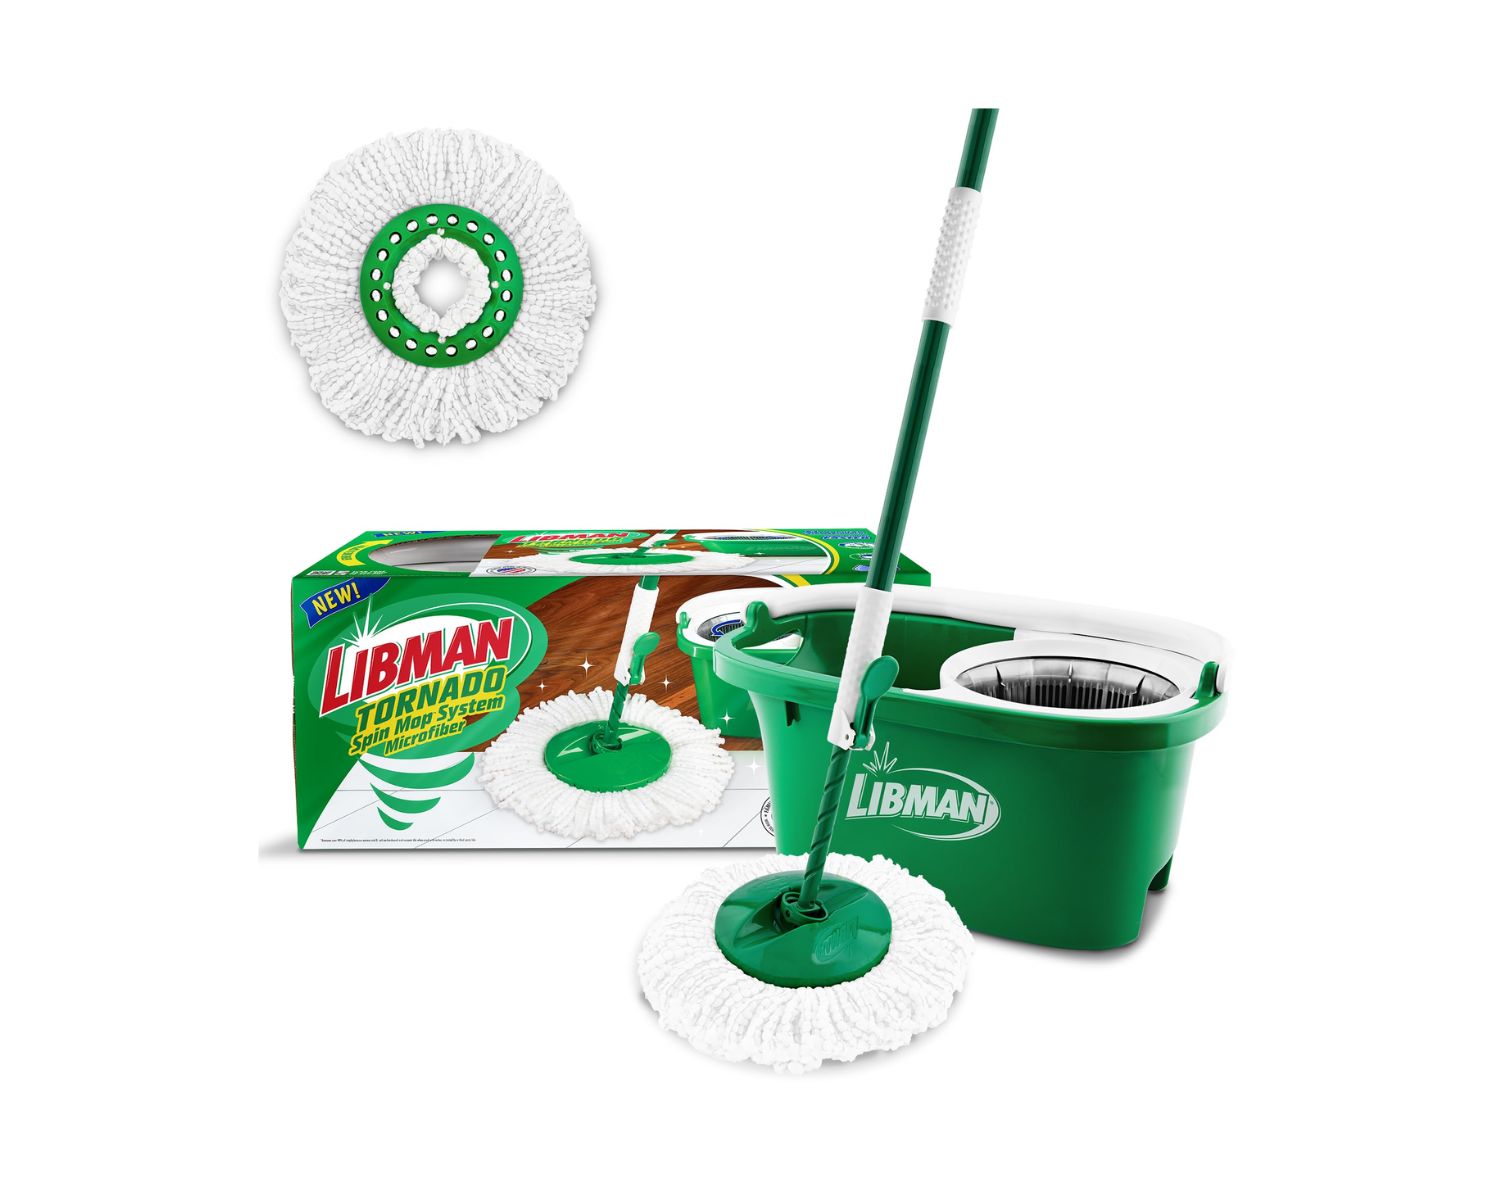 How To Change Mop Head On Libman Mop